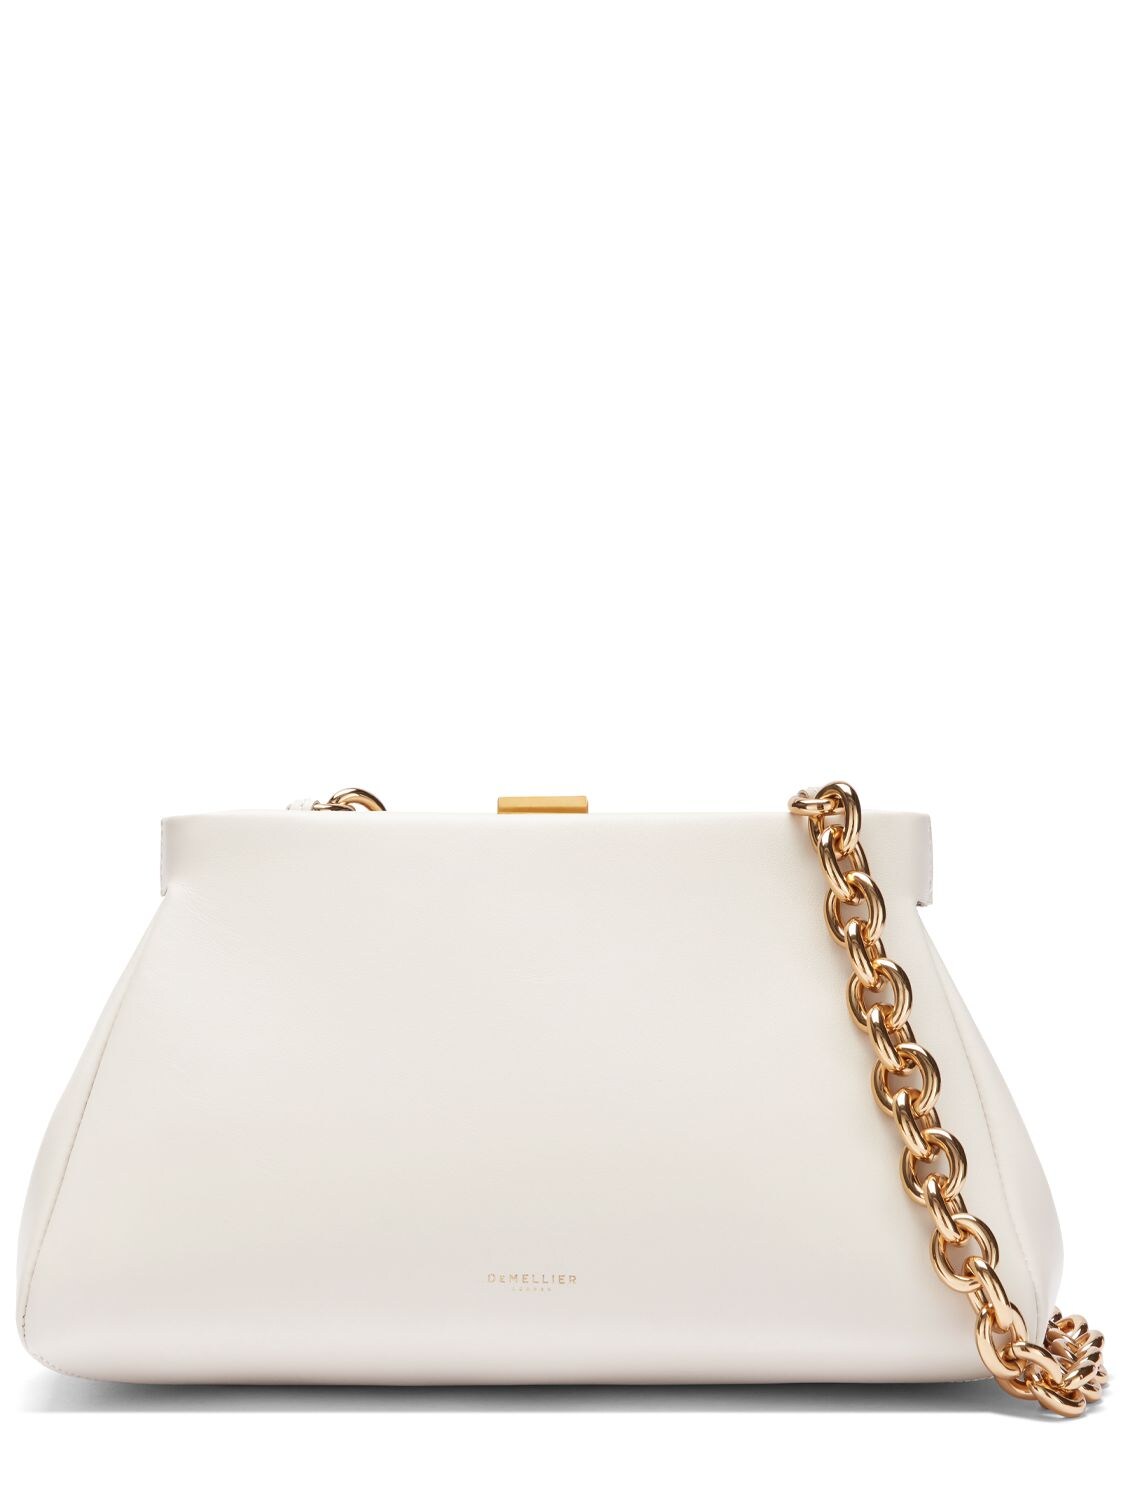 DEMELLIER CANNES CHUNKY CHAIN LEATHER CLUTCH